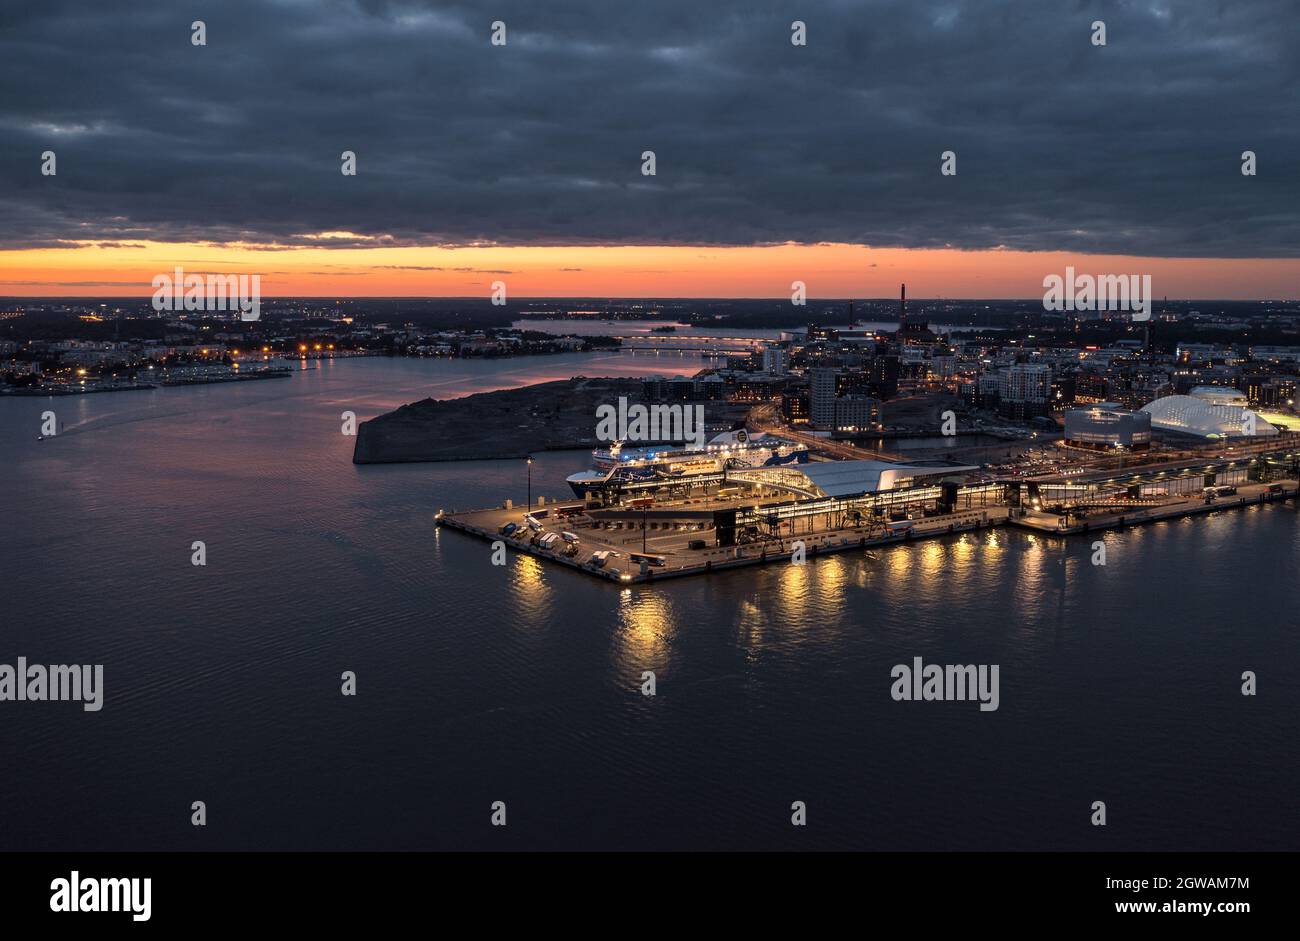 Aerial view of West Harbor at night in Helsinki, Finland Stock Photo